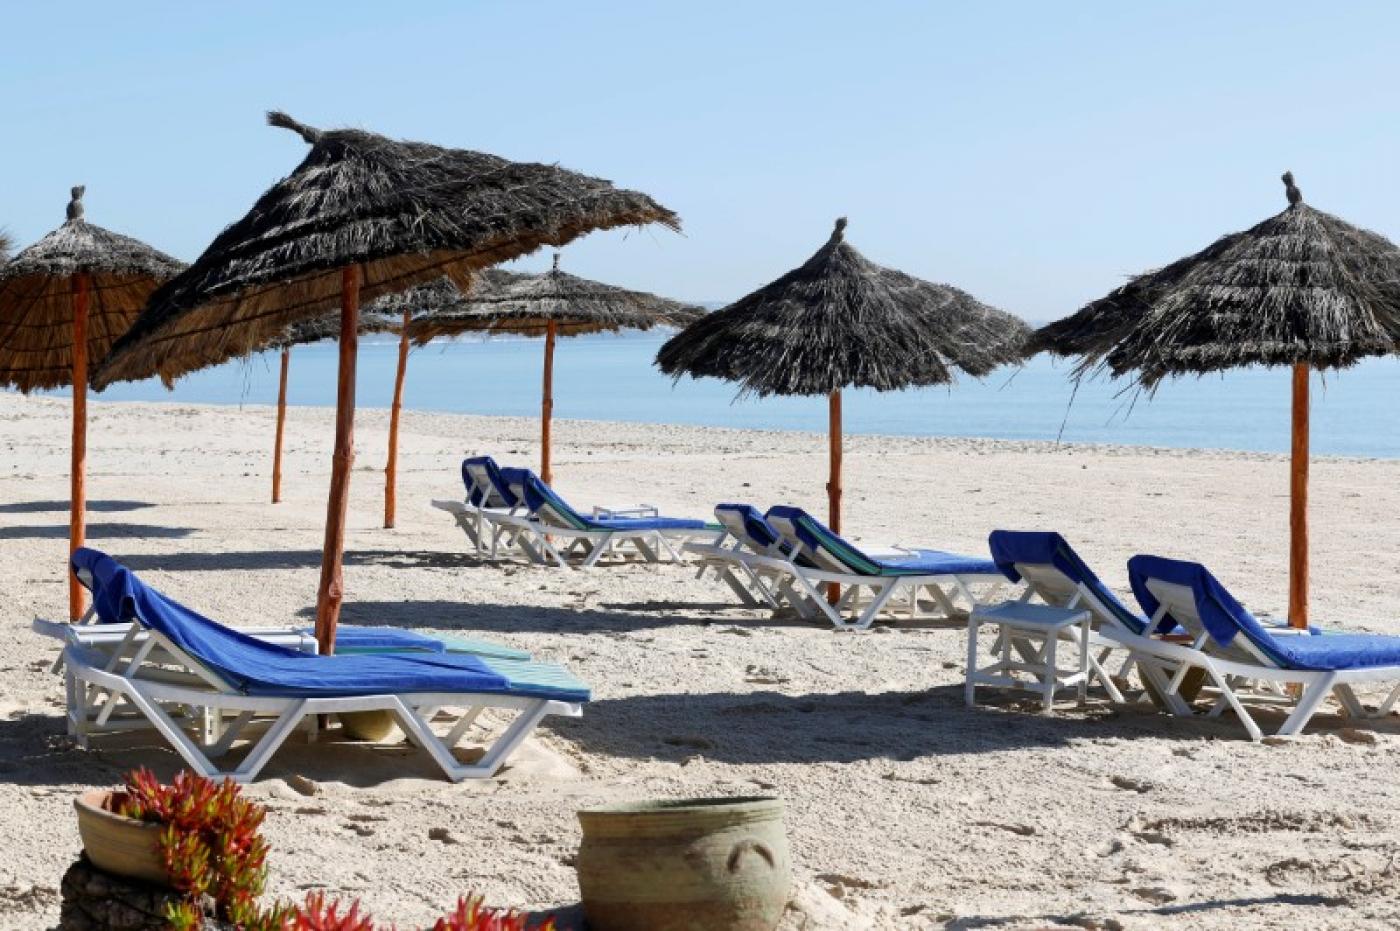 Tunisia forecasts $1.4bn-loss in revenue in tourism sector over Coronavirus pandemic